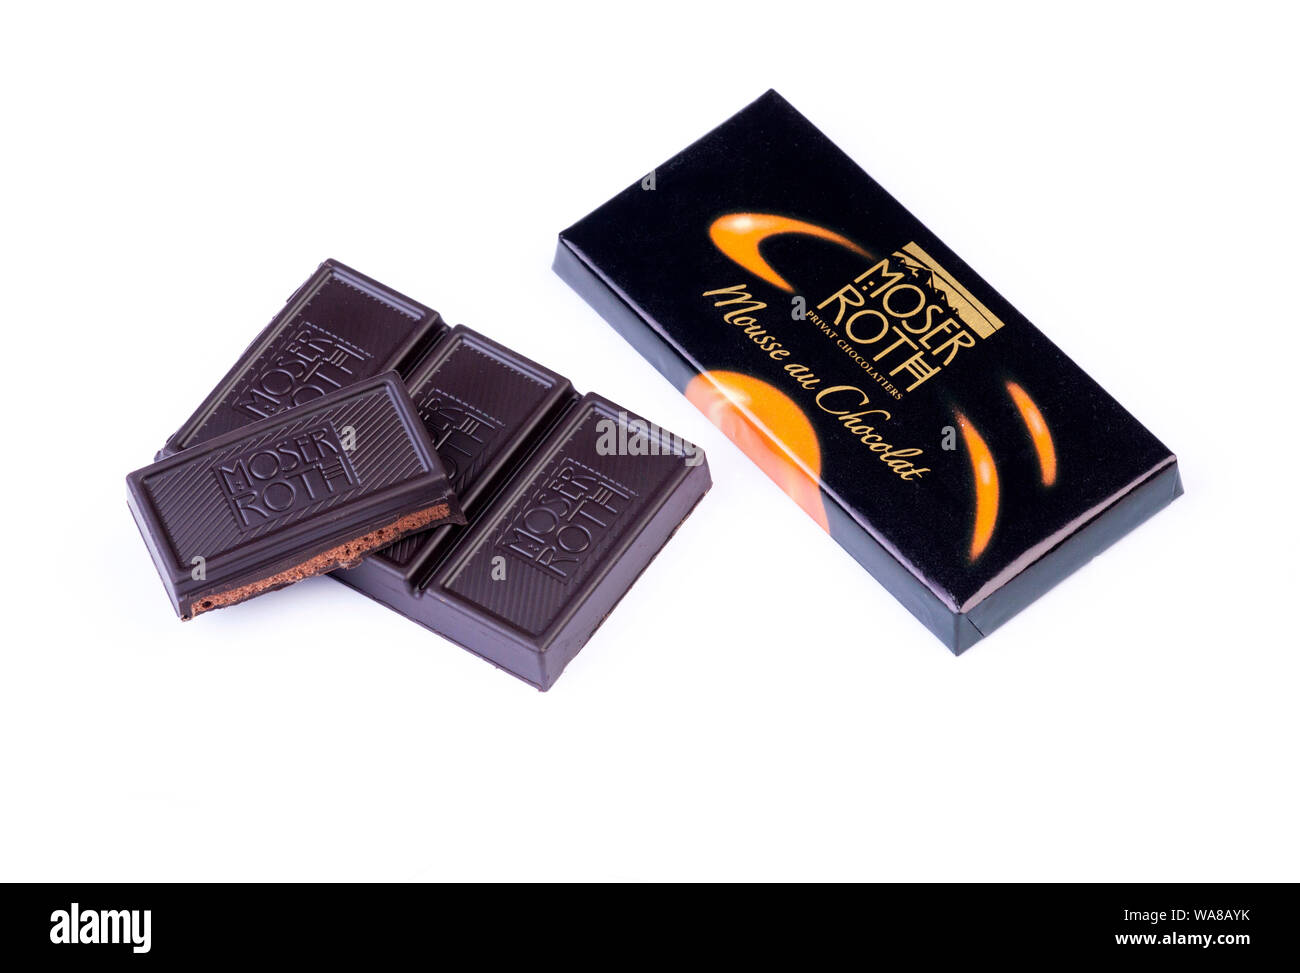 Moser Roth dark chocolate sold exclusively by Aldi Stock Photo - Alamy